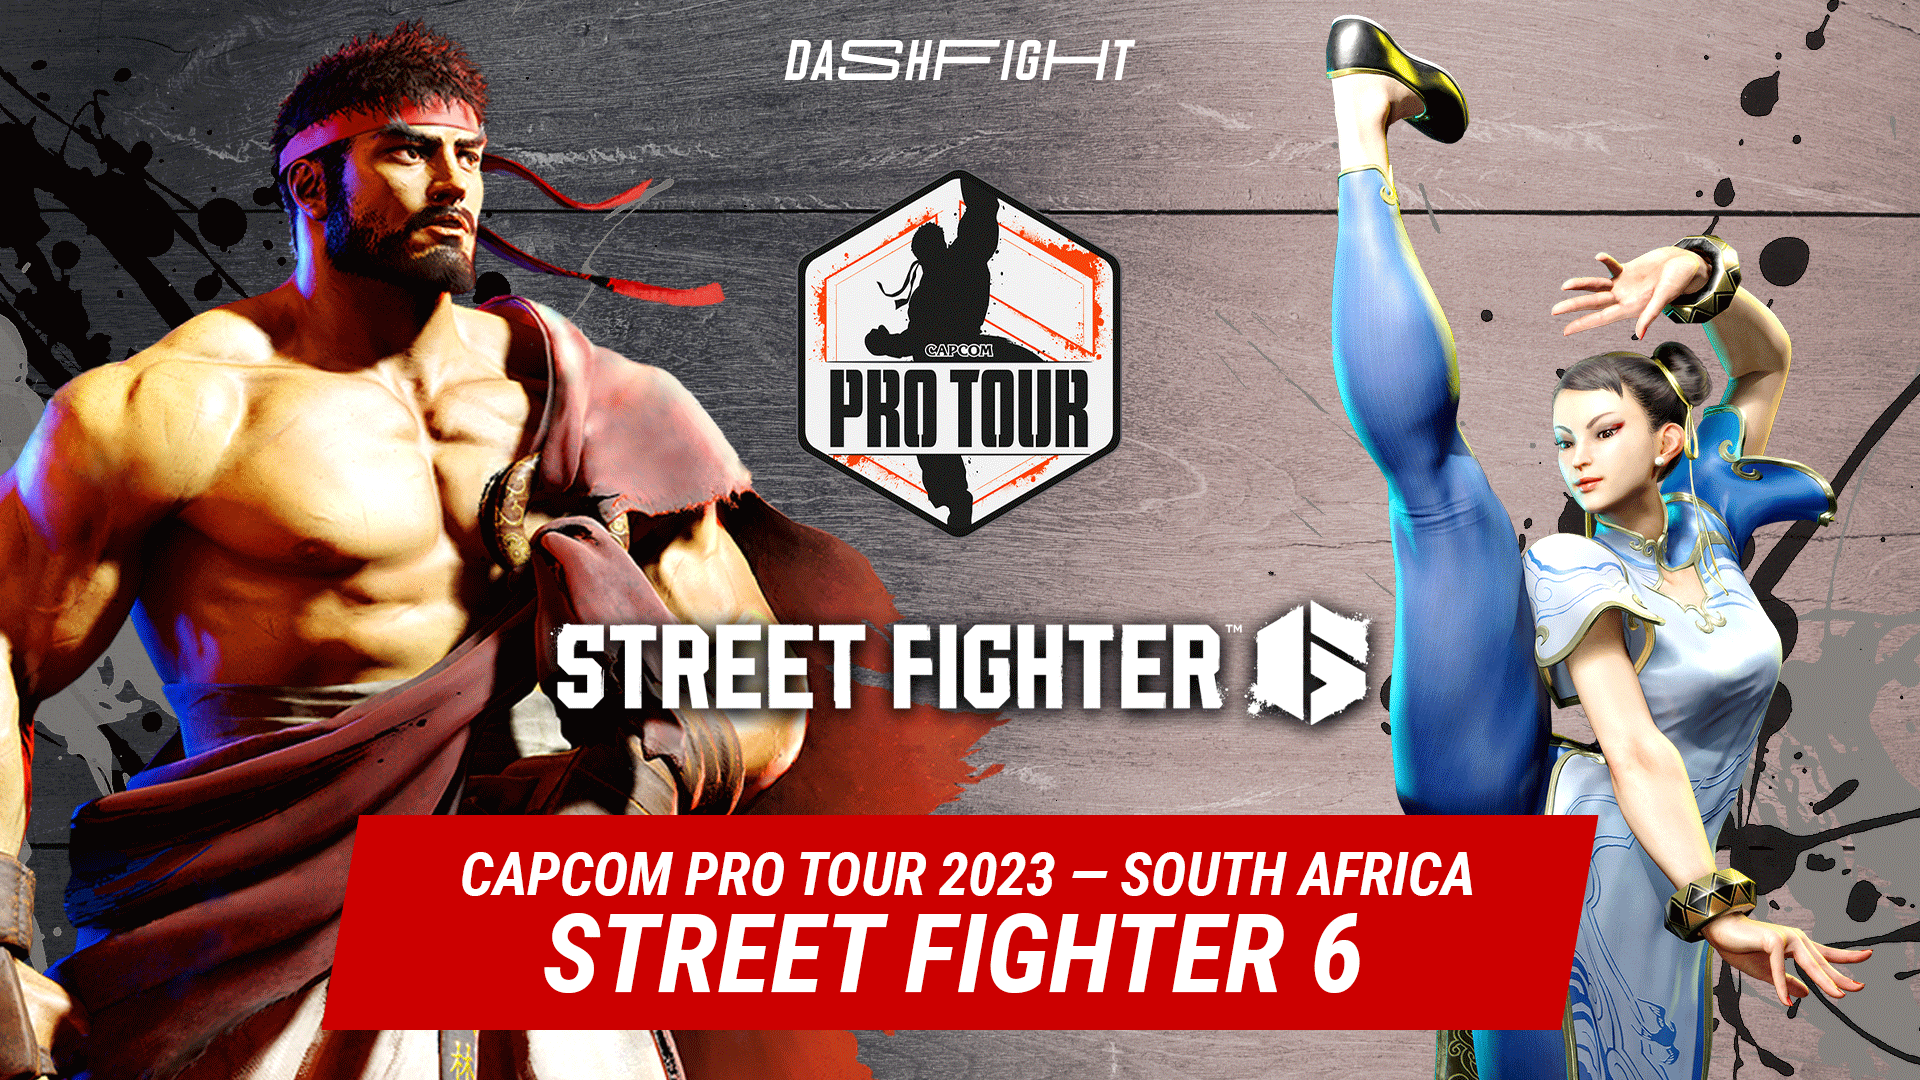 Capcom Pro Tour 2023 South Africa Results and Standings